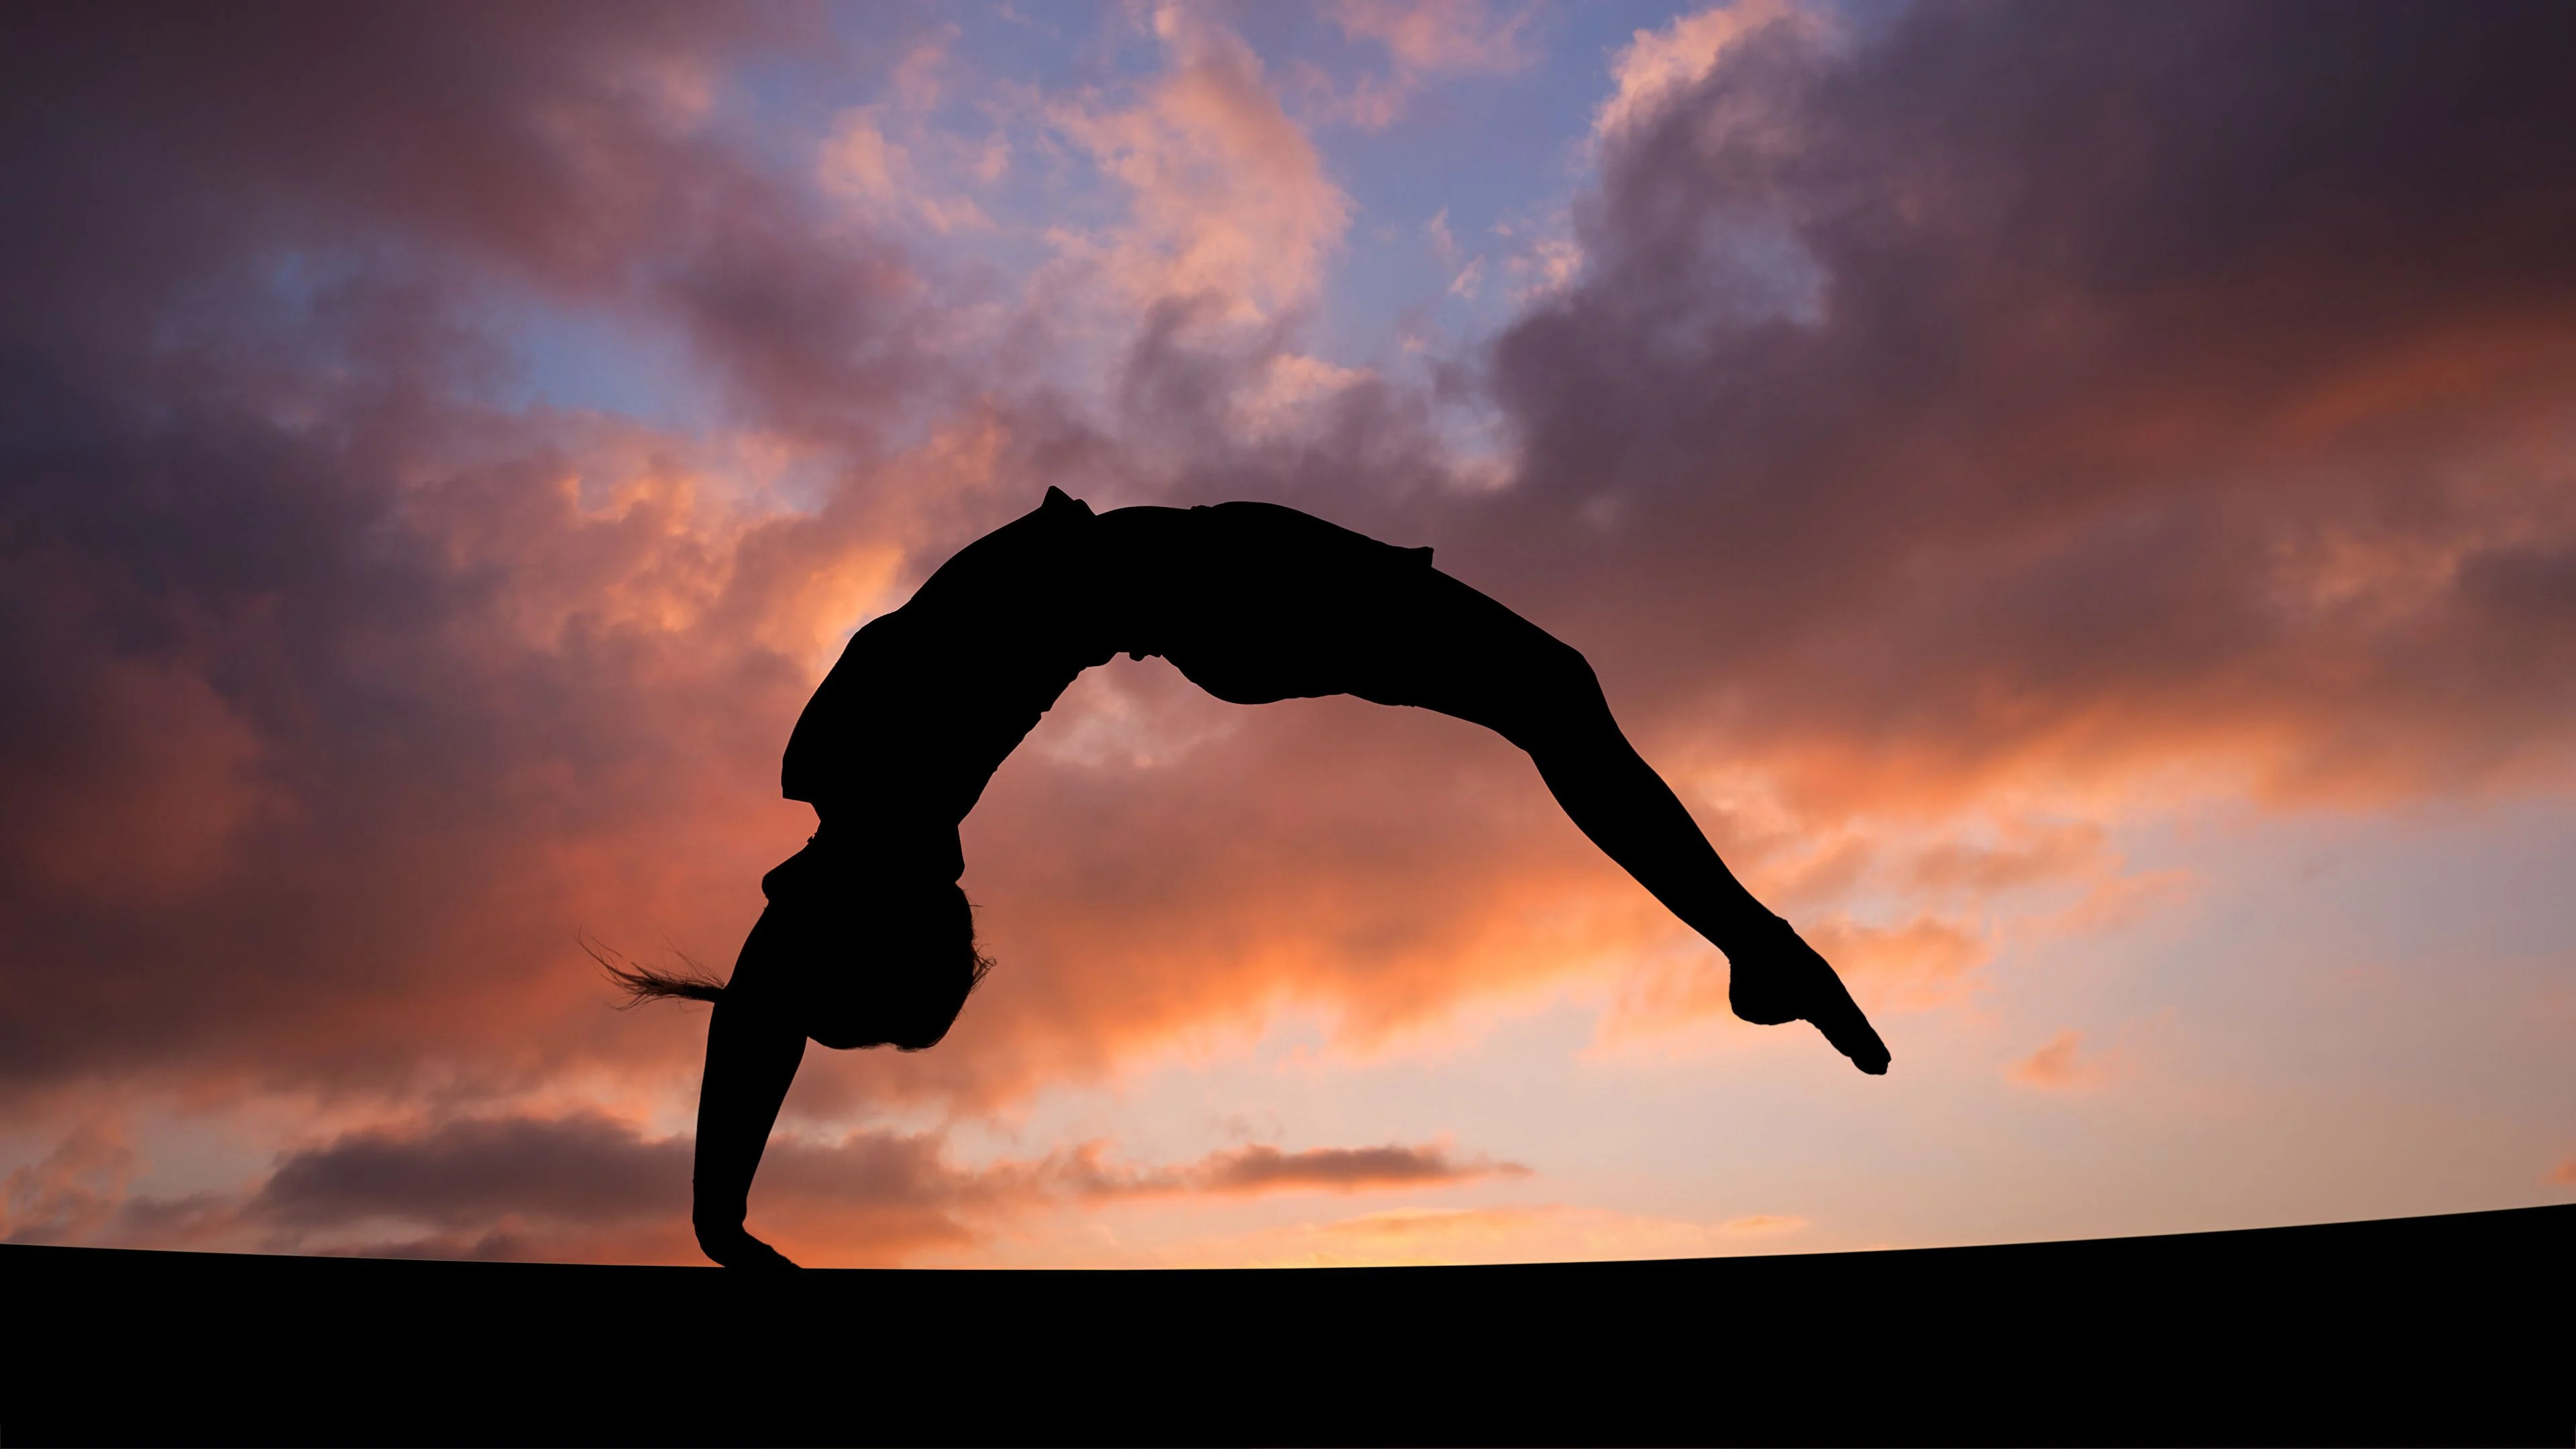 Acrobatic Gymnastics: A person performs figures consisting of various moves, dance elements, stretches and tumbling. 3840x2160 4K Wallpaper.